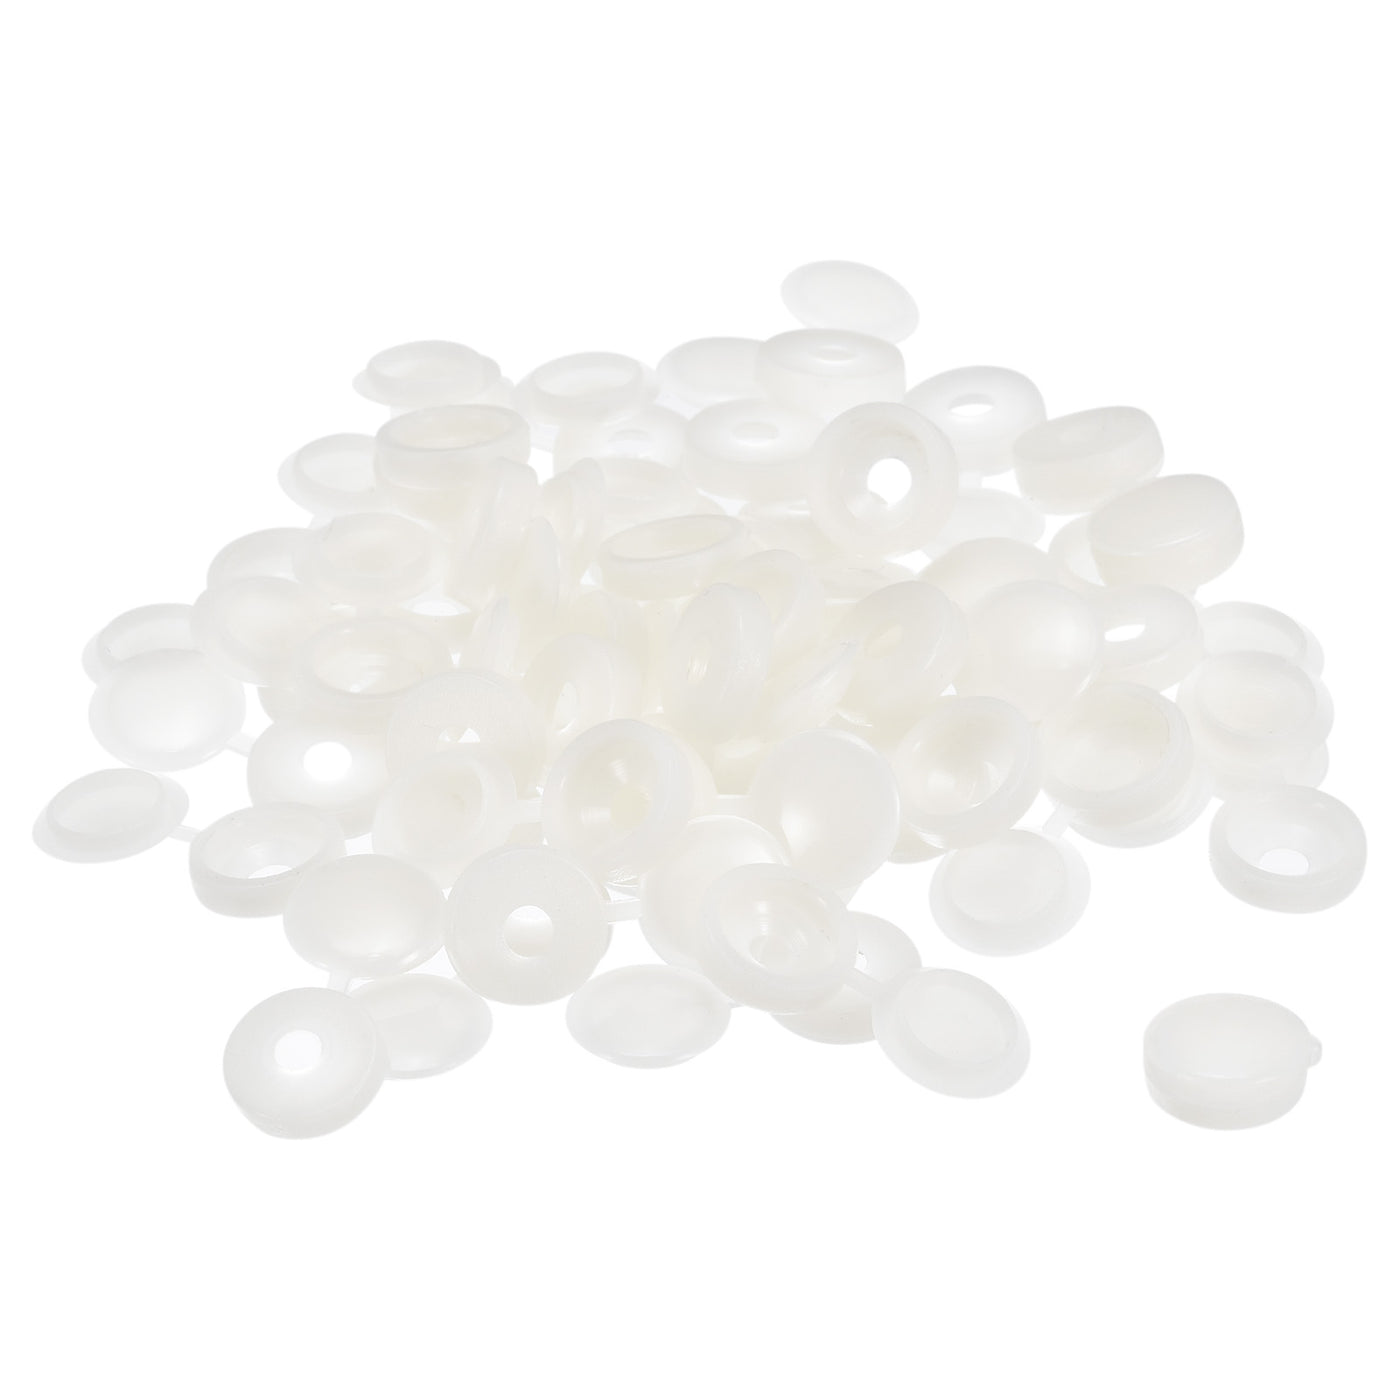 uxcell Uxcell 150Pcs 4mm Hinged Screw Cover Caps Plastic Fold Screw Snap Covers, Warm White